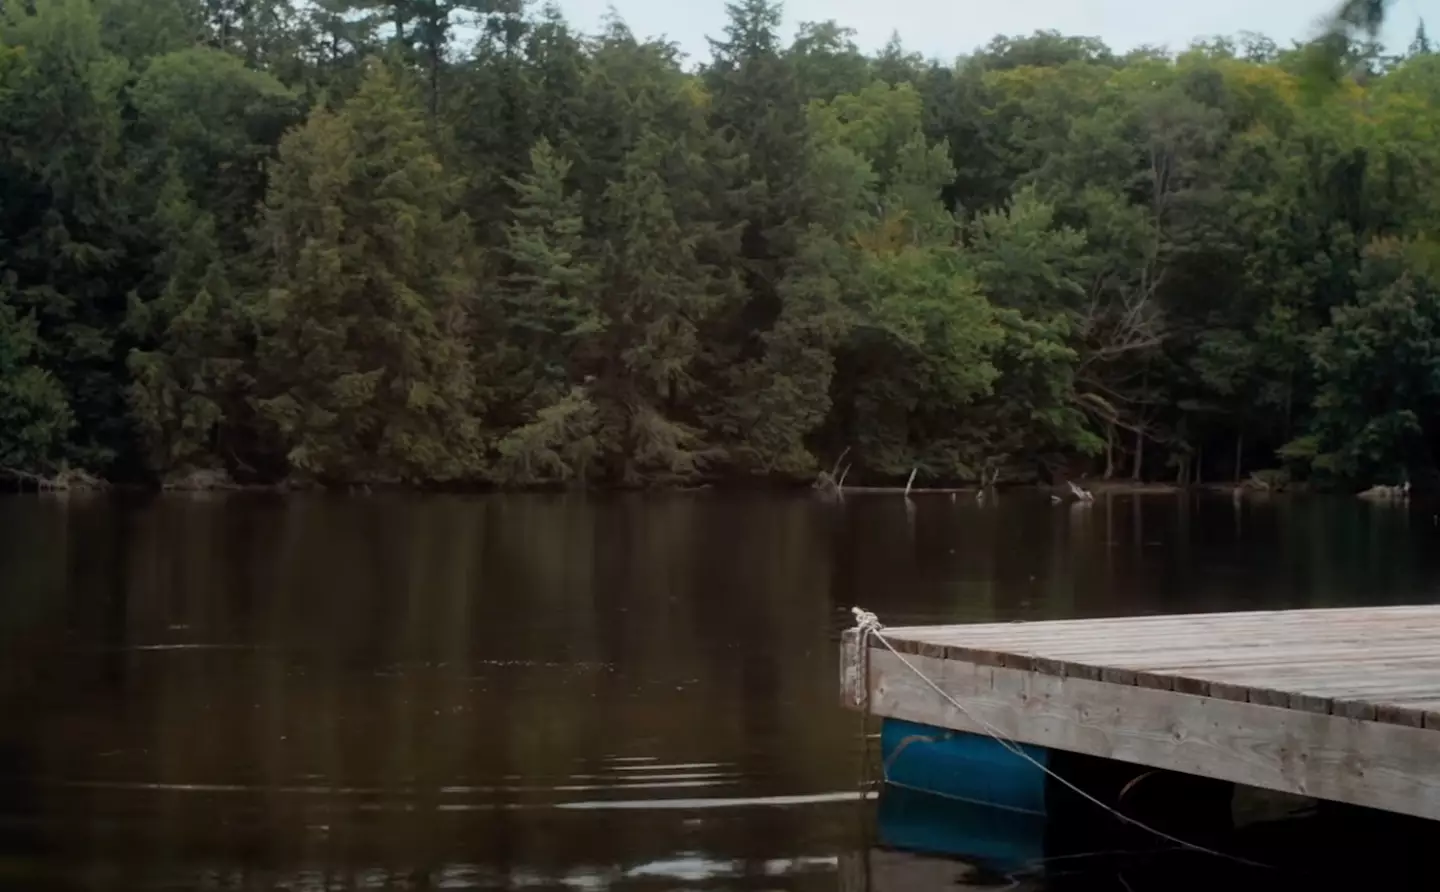 The lake scene that teases what is to come in the trailer In A Violent Nature.